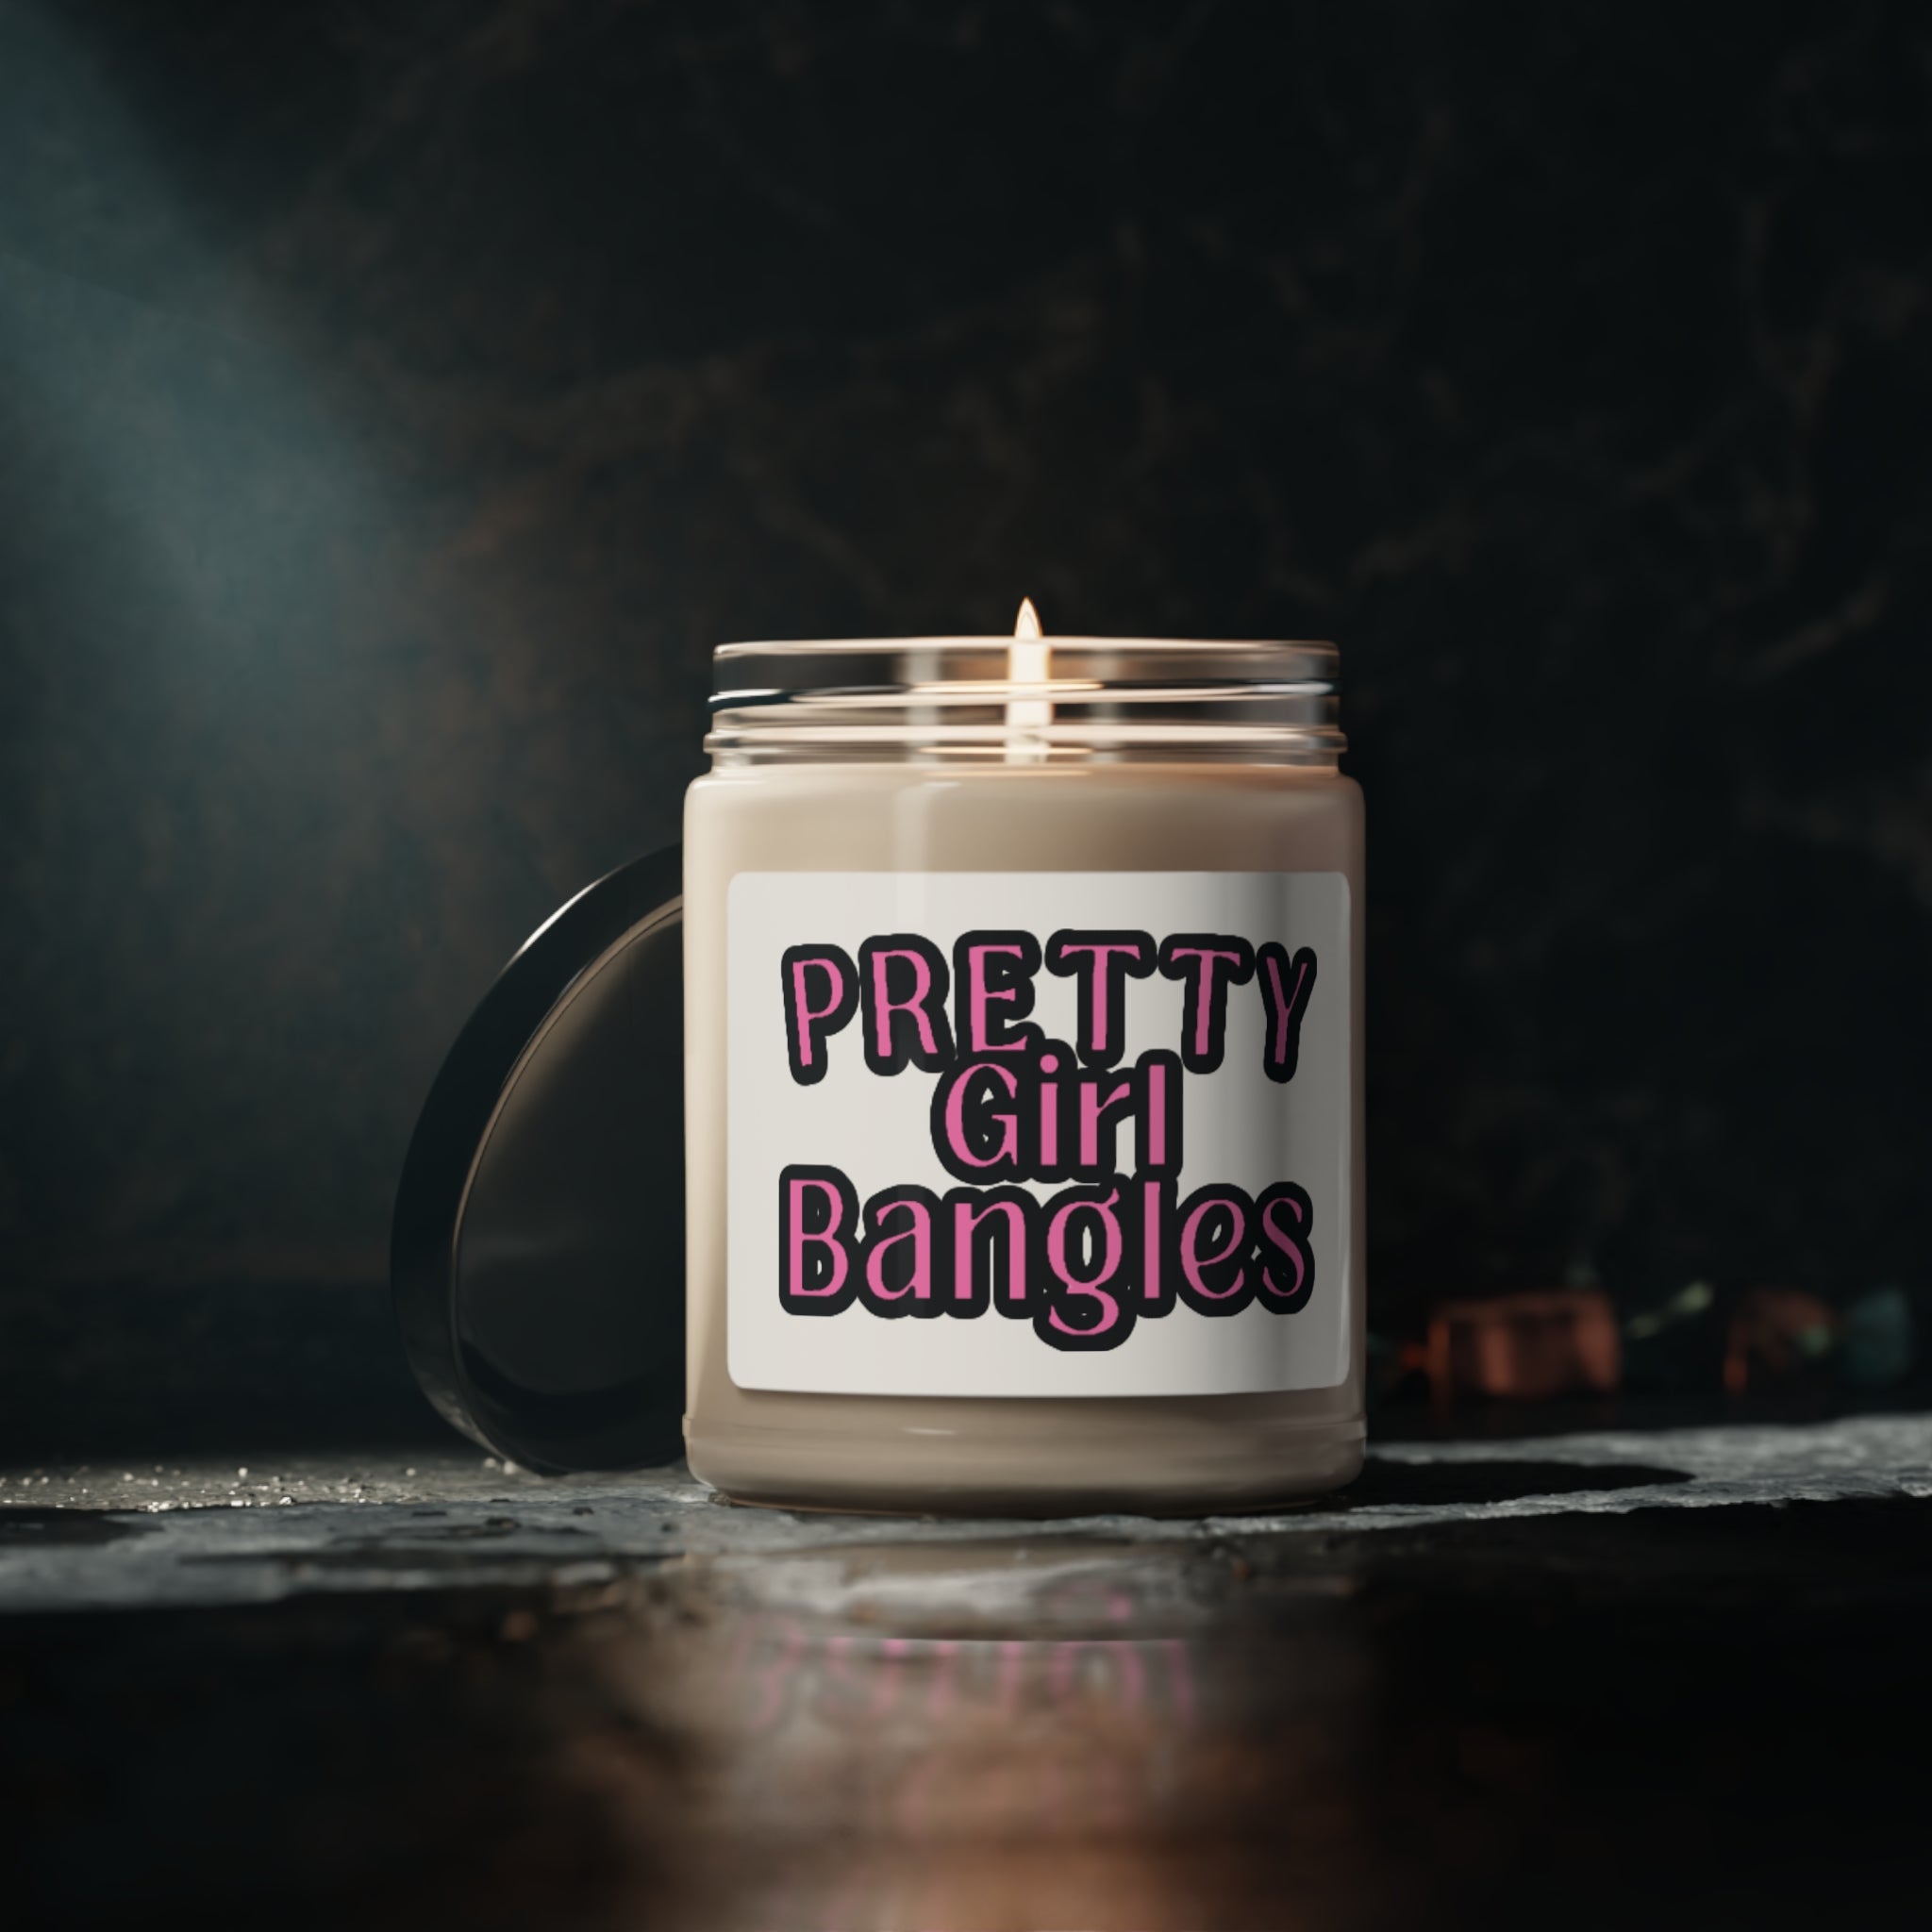 Classic Logo Scented Soy Candle